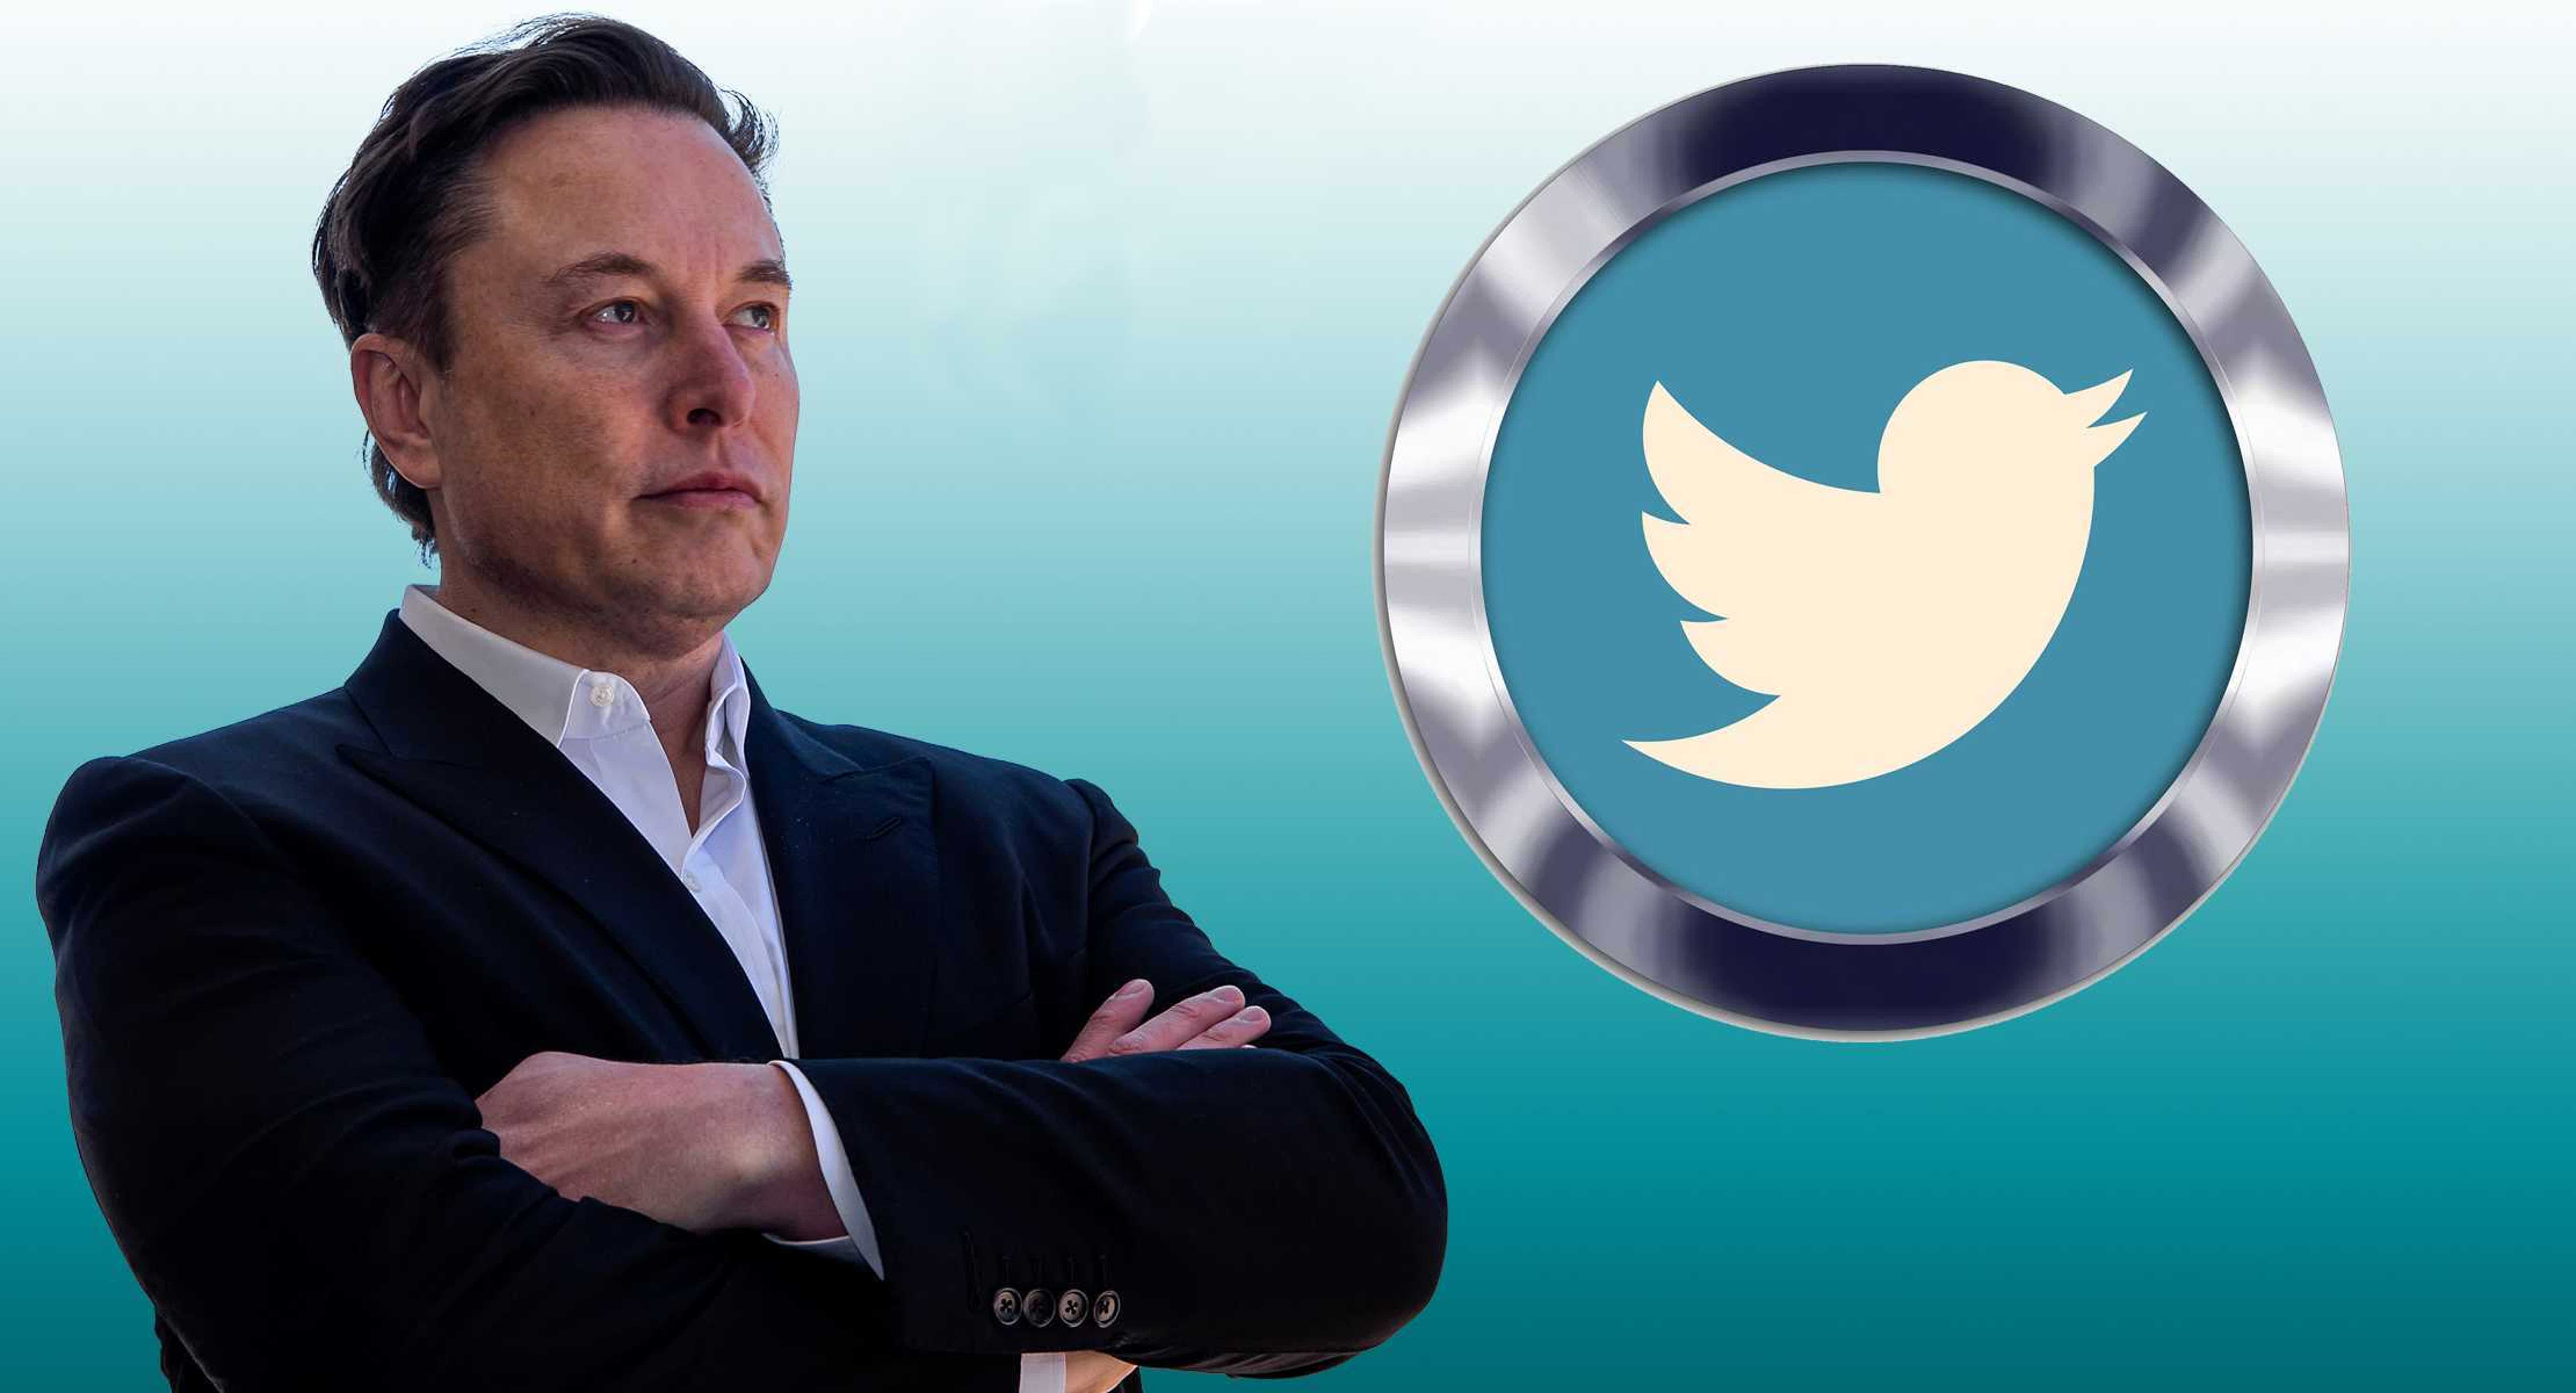 Twitter Asks Elon Musk: Who Did You Chat With About Buyout? The List May Be Longer Than We Thought